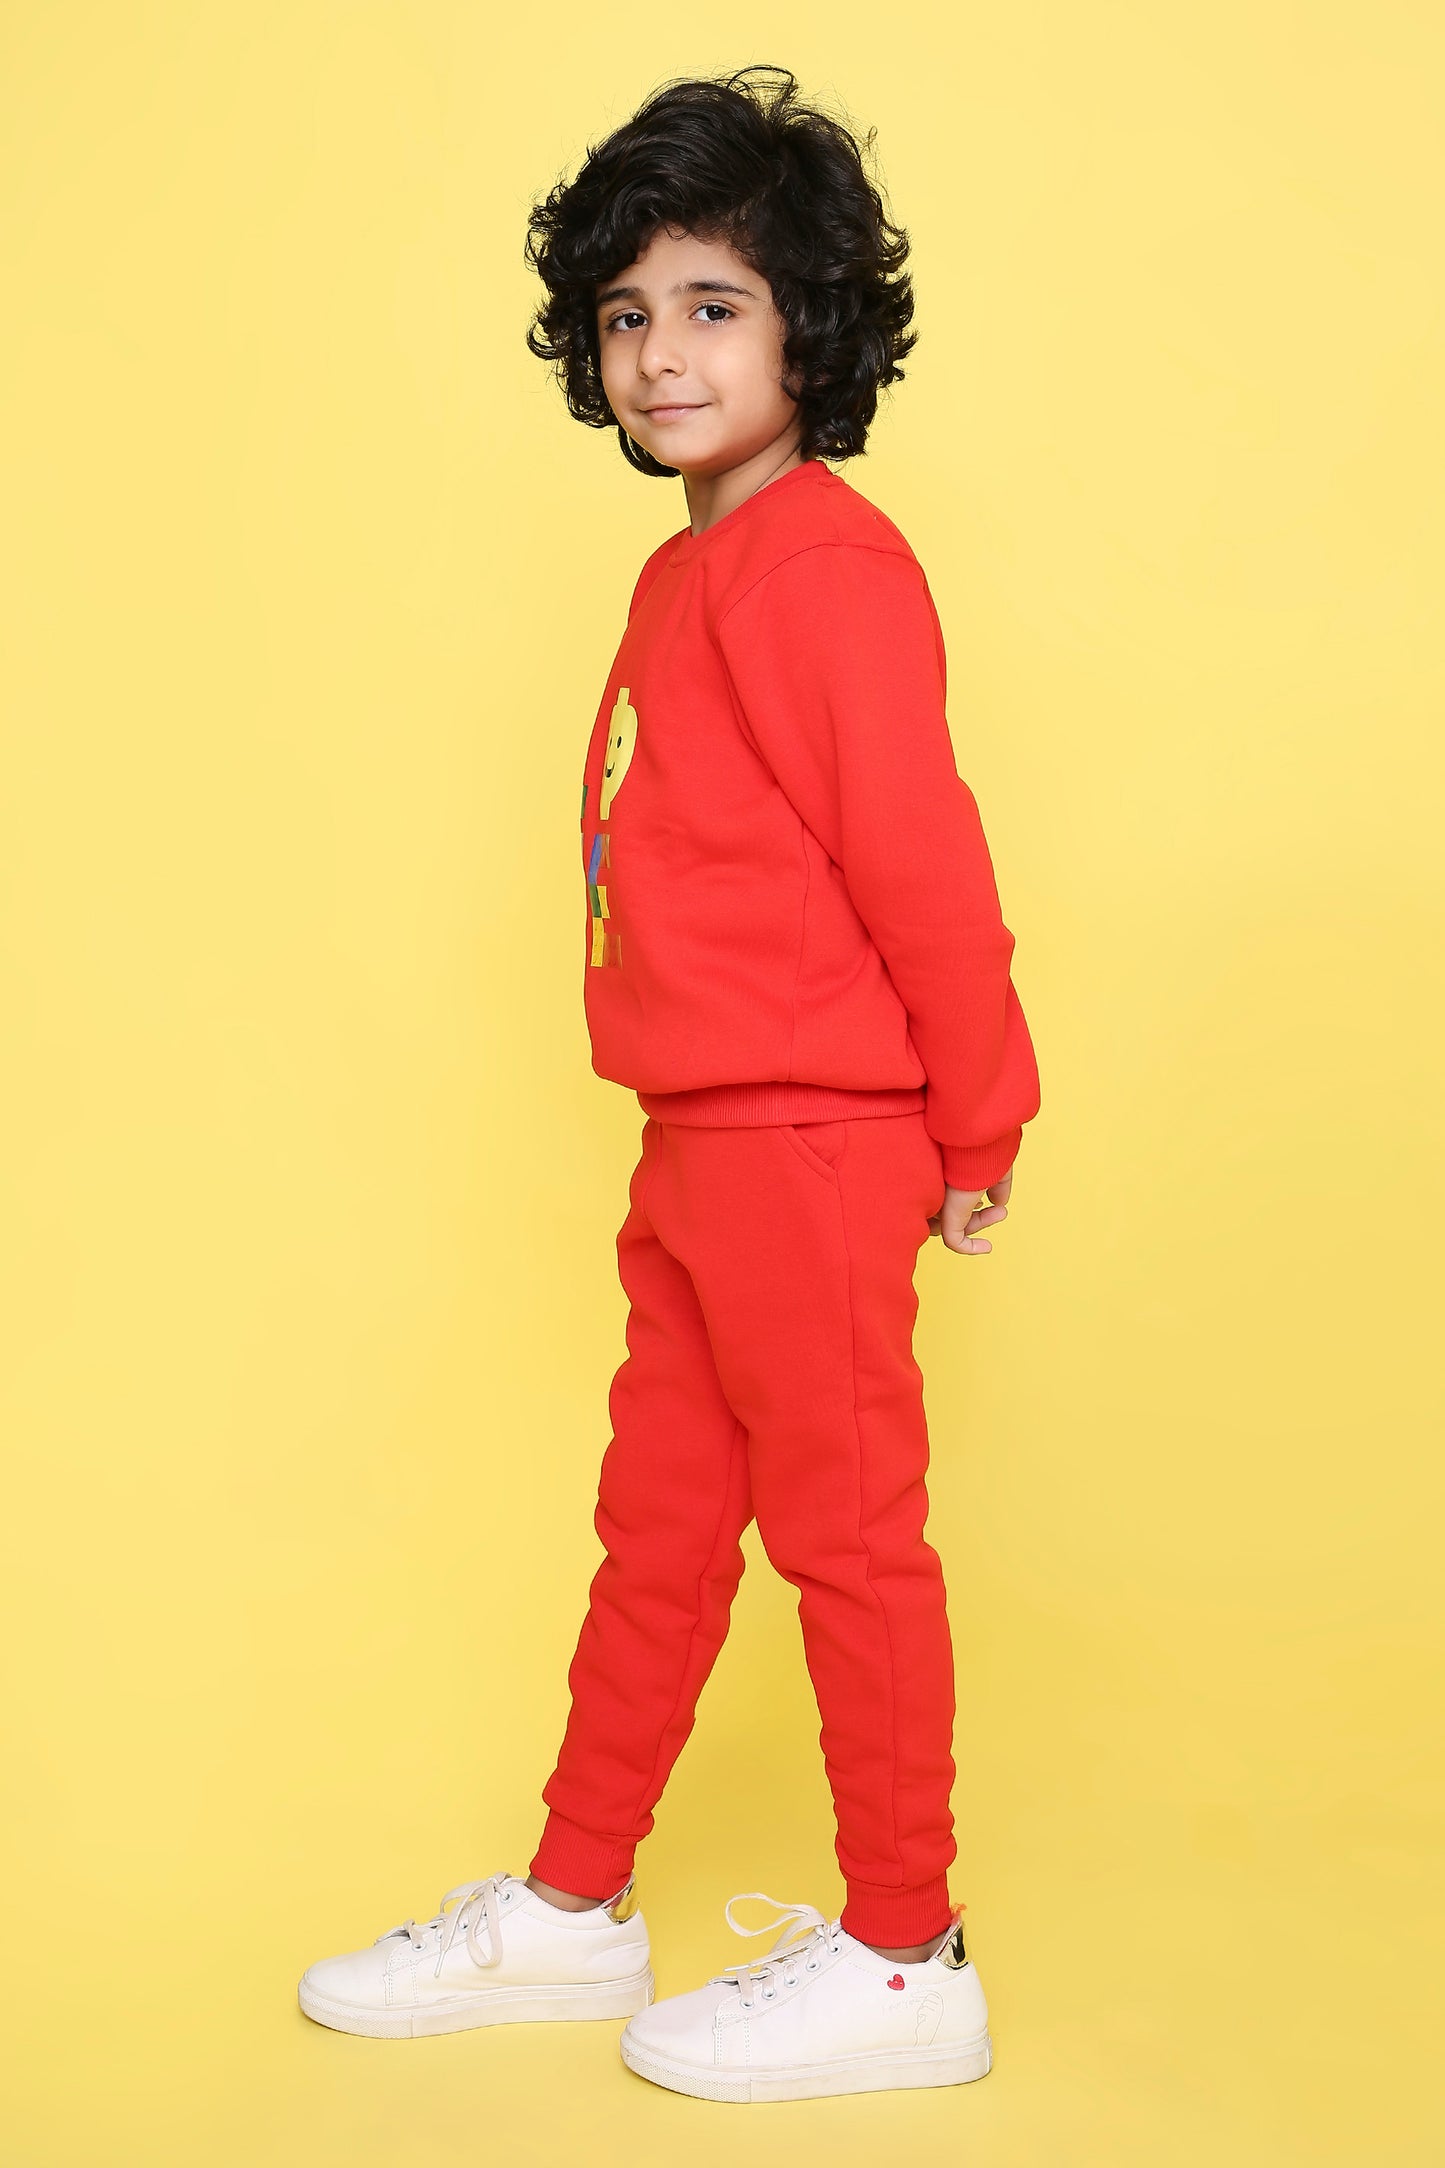 Knitting Doodles Kids' Jogger Set with Warm Fleece and Smart Love print- Red